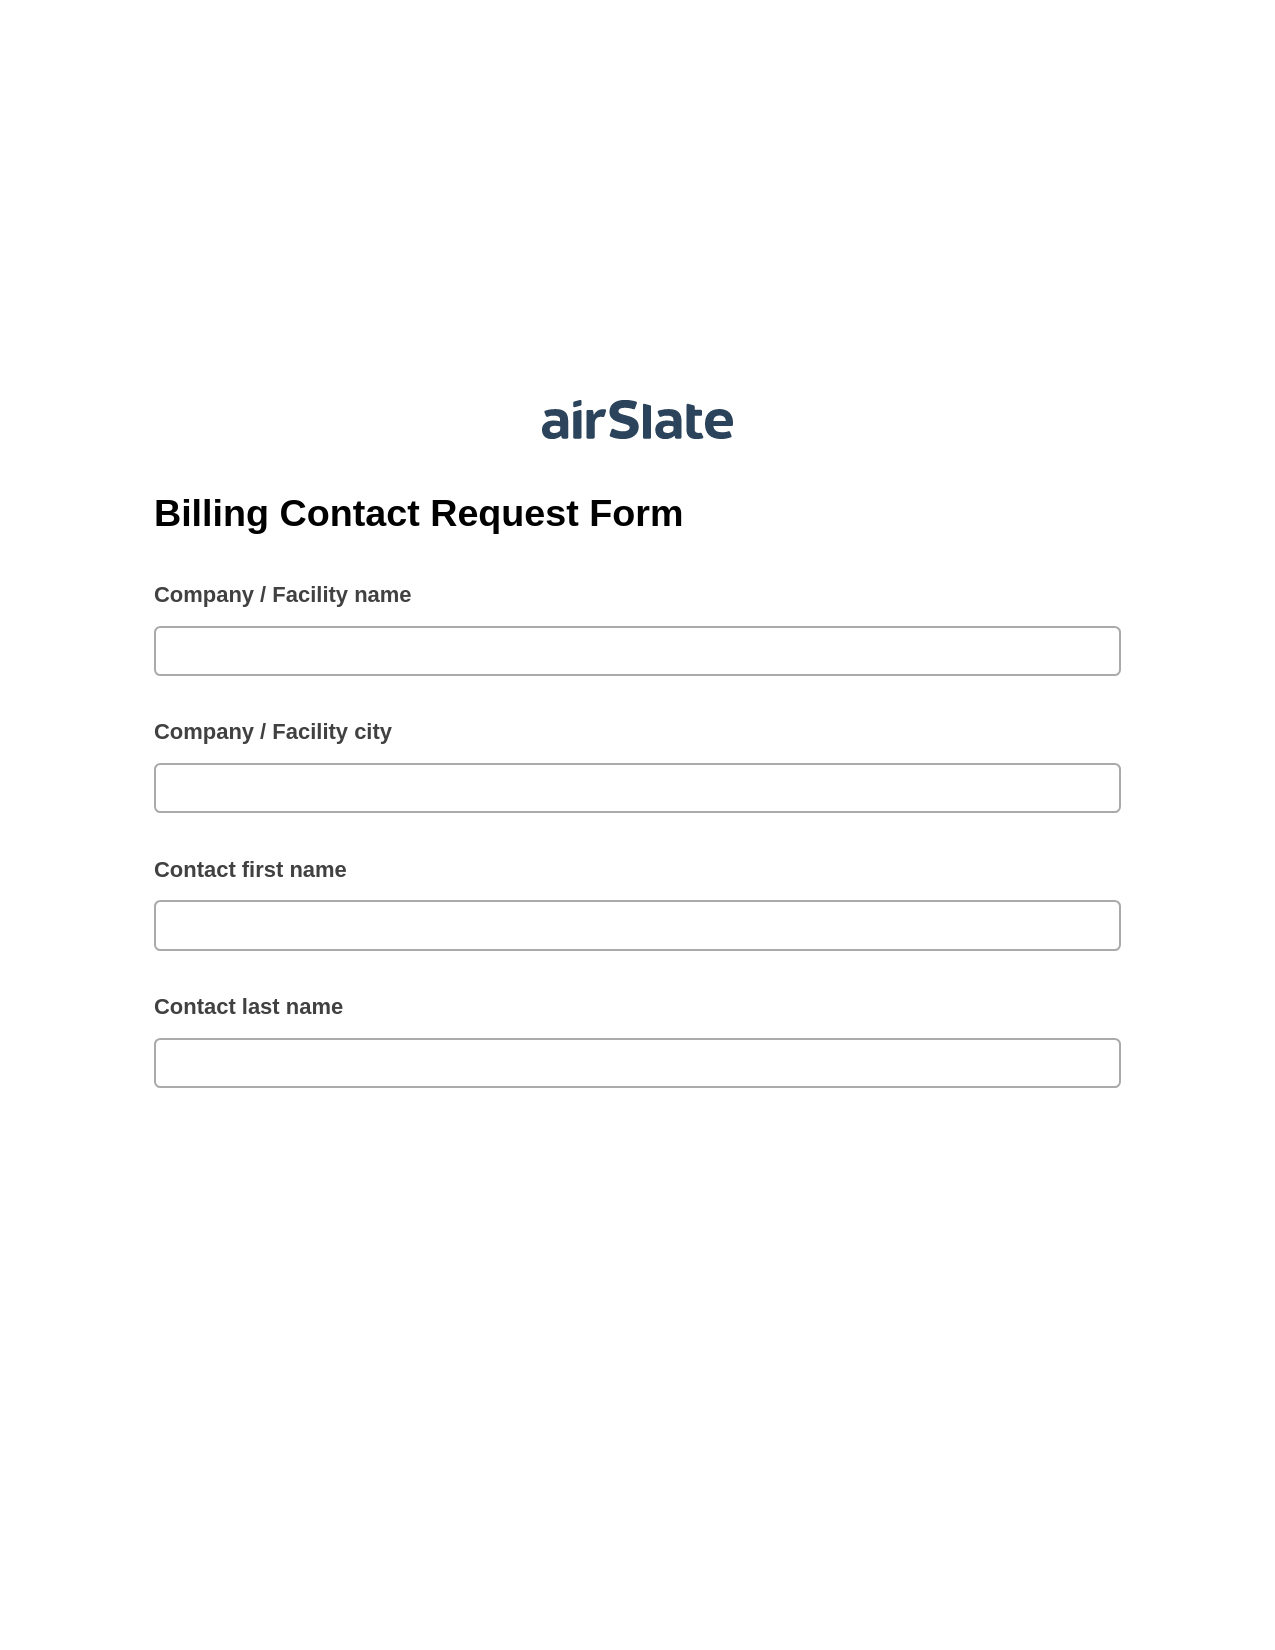 Billing Contact Request Form Pre-fill Dropdowns from MySQL Bot, Lock the slate bot, Export to MySQL Bot